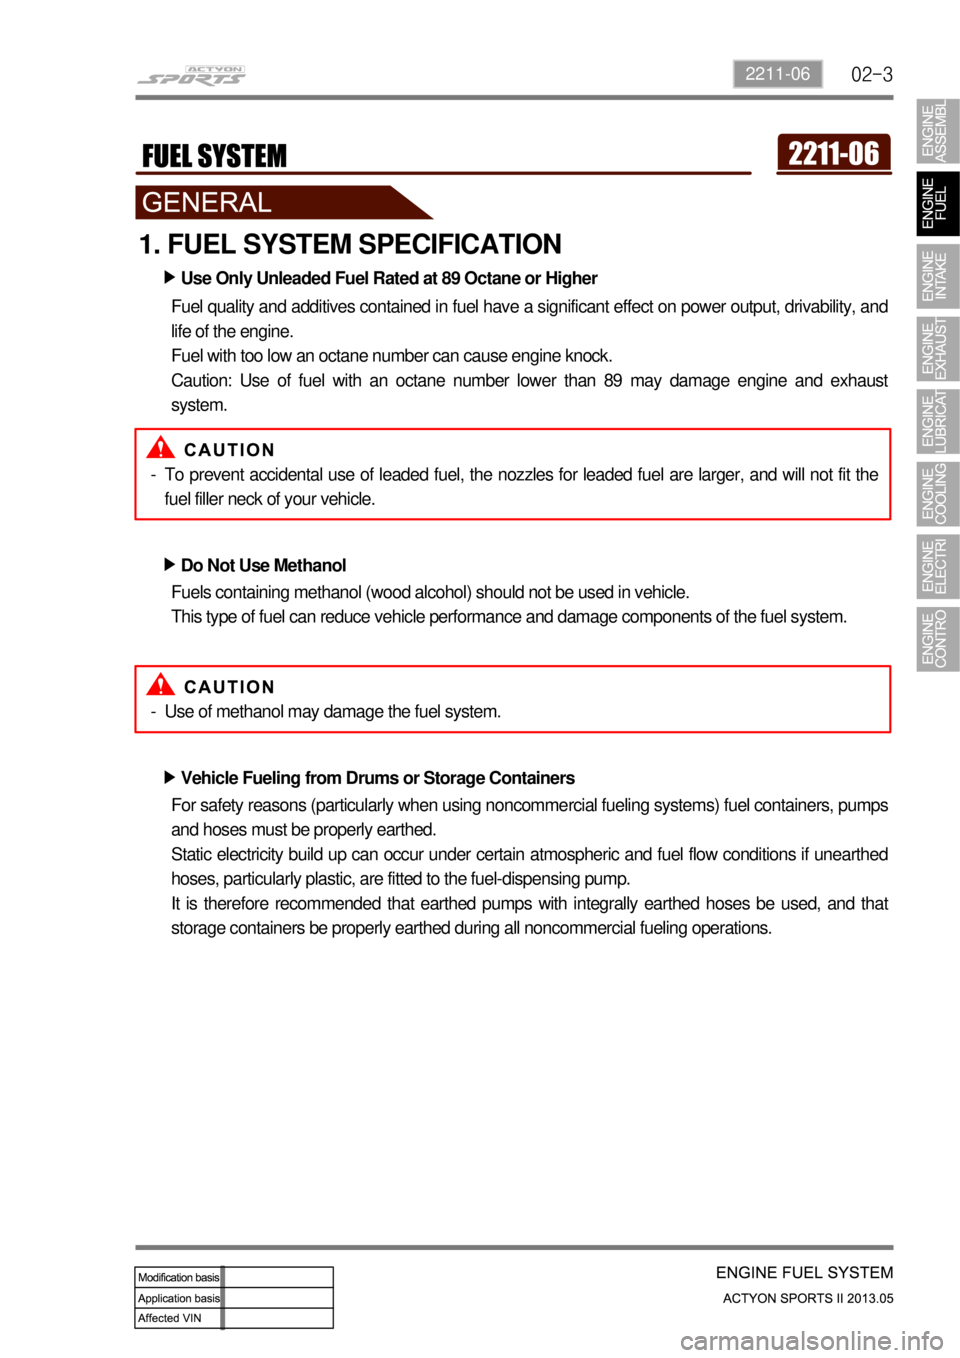 SSANGYONG NEW ACTYON SPORTS 2013  Service Manual 02-32211-06
1. FUEL SYSTEM SPECIFICATION
Use Only Unleaded Fuel Rated at 89 Octane or Higher ▶
Fuel quality and additives contained in fuel have a significant effect on power output, drivability, an